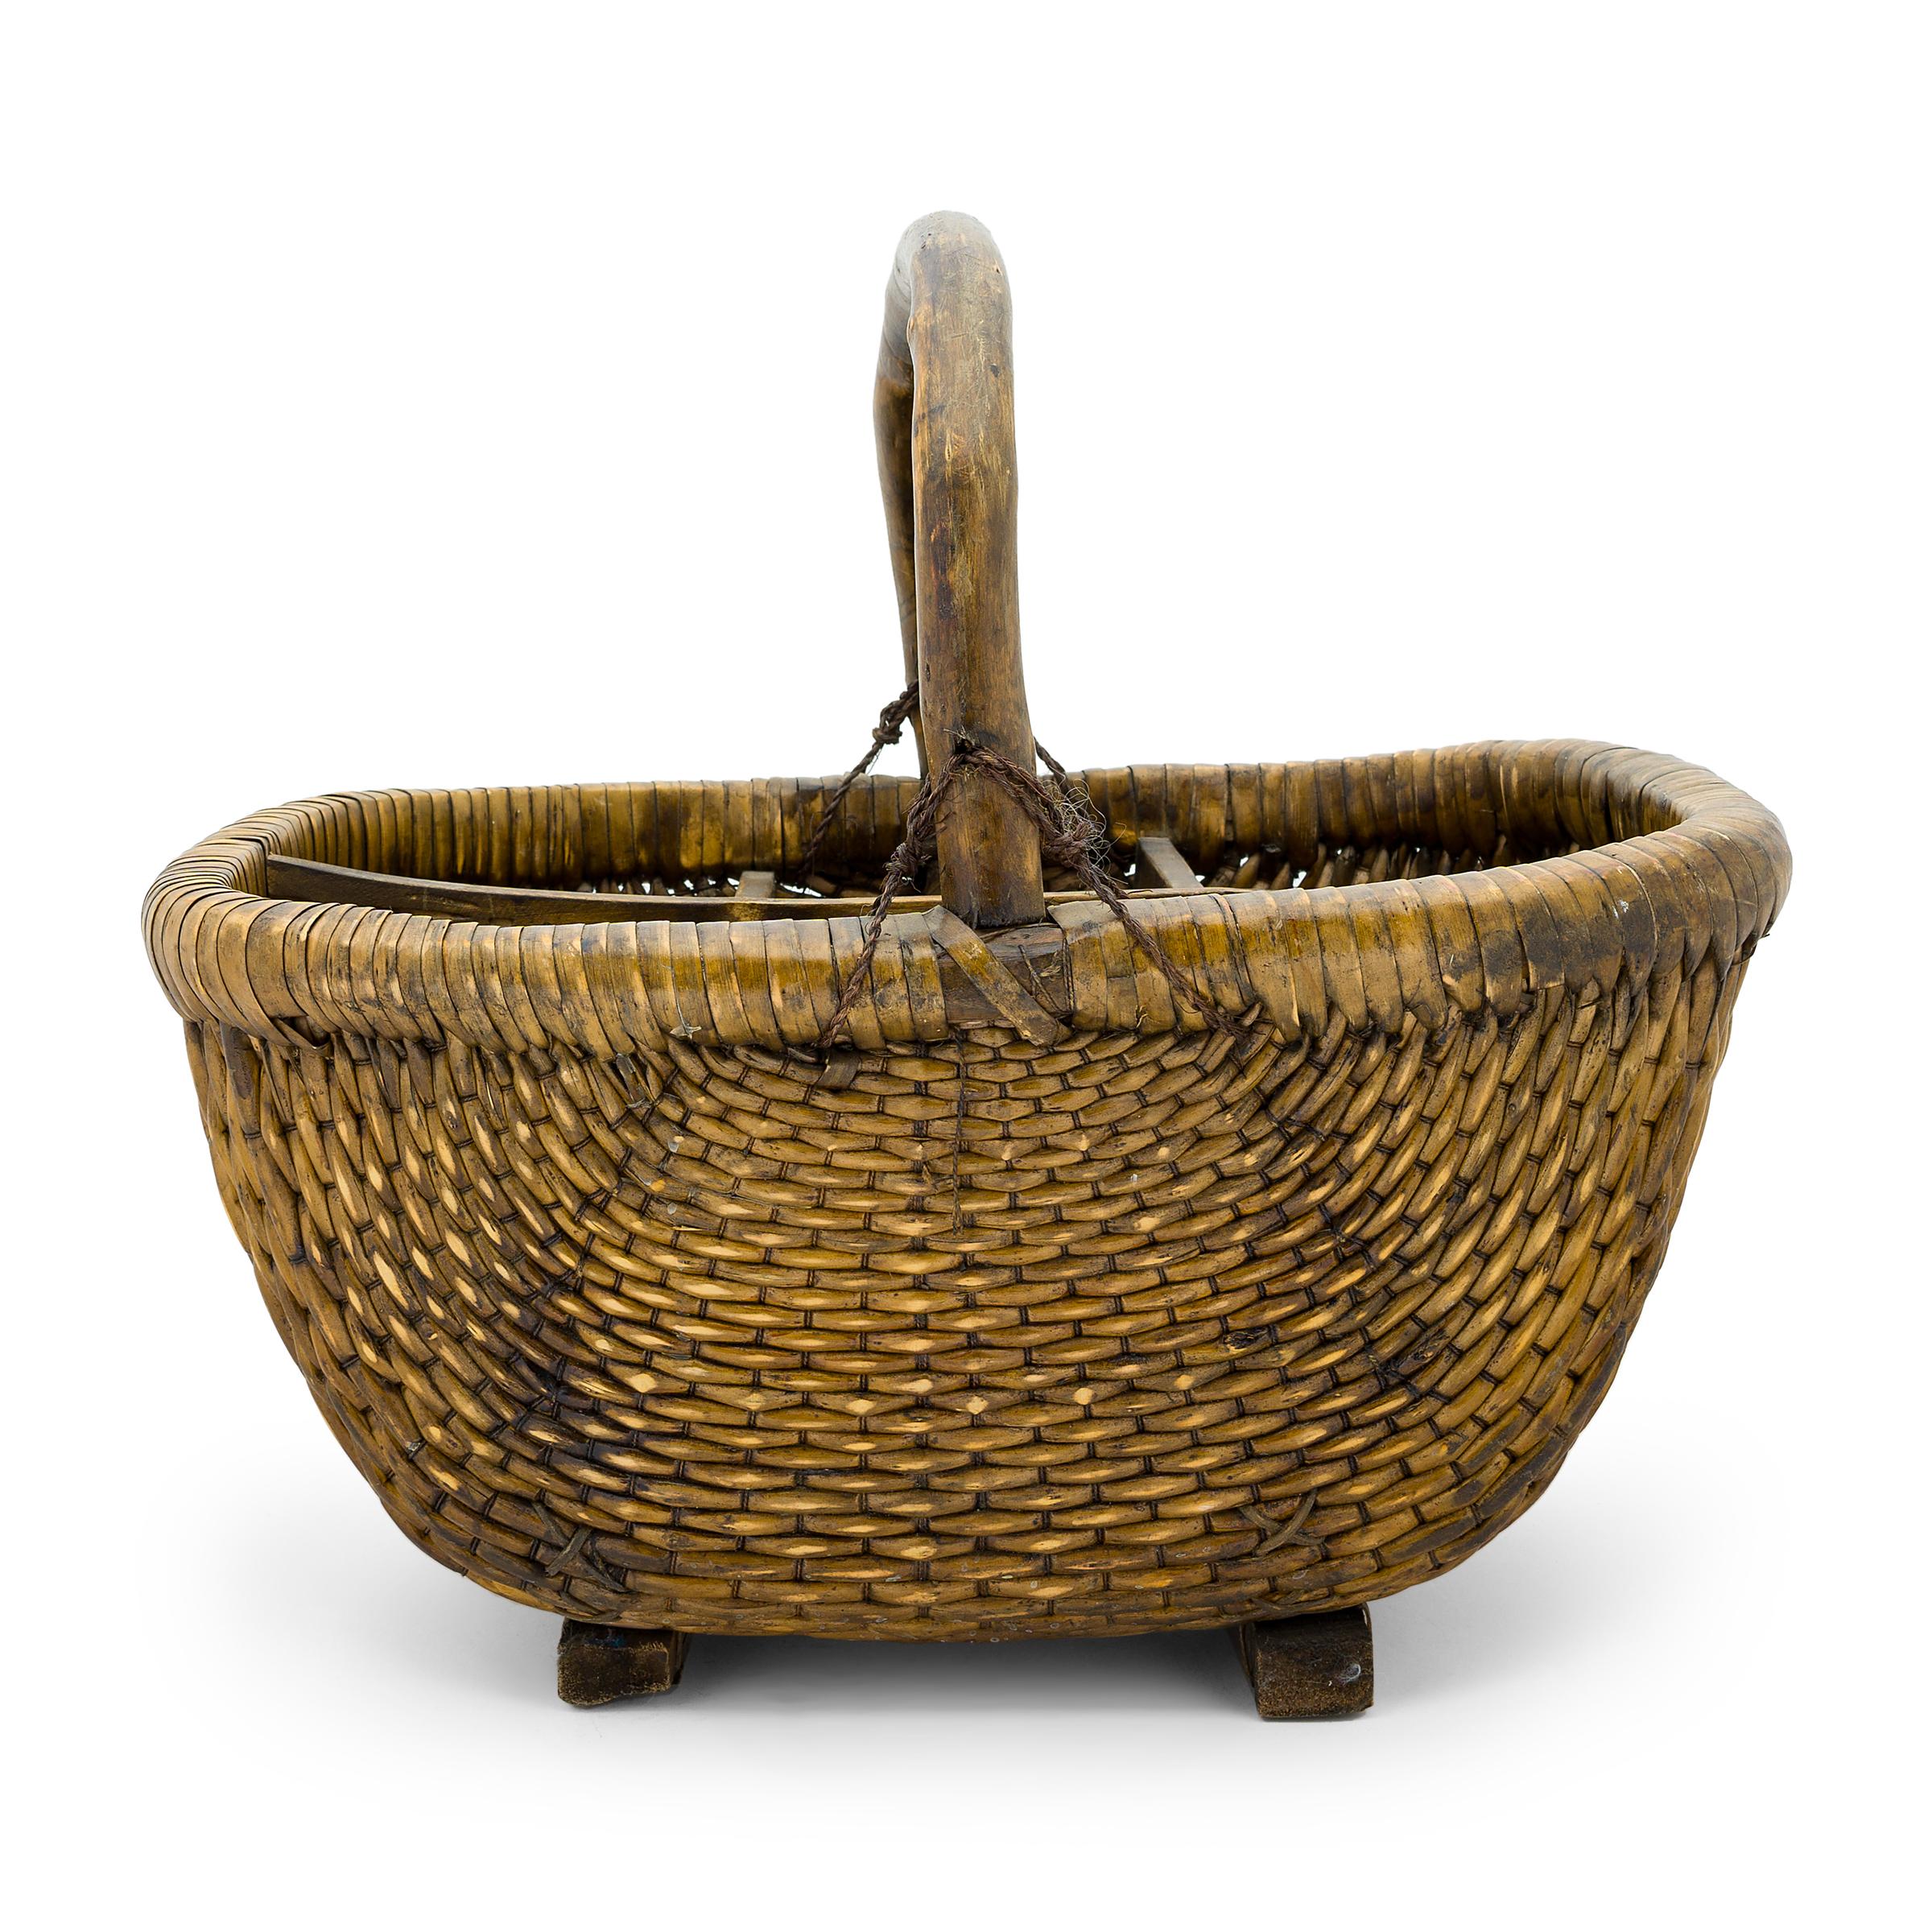 It is easy to imagine someone, long ago, walking to market on a summer's day with this beautiful woven basket tucked under their arm. Hand-woven of willow and twine, the basket has a rectangular form woven around a wooden rim and held by an arched